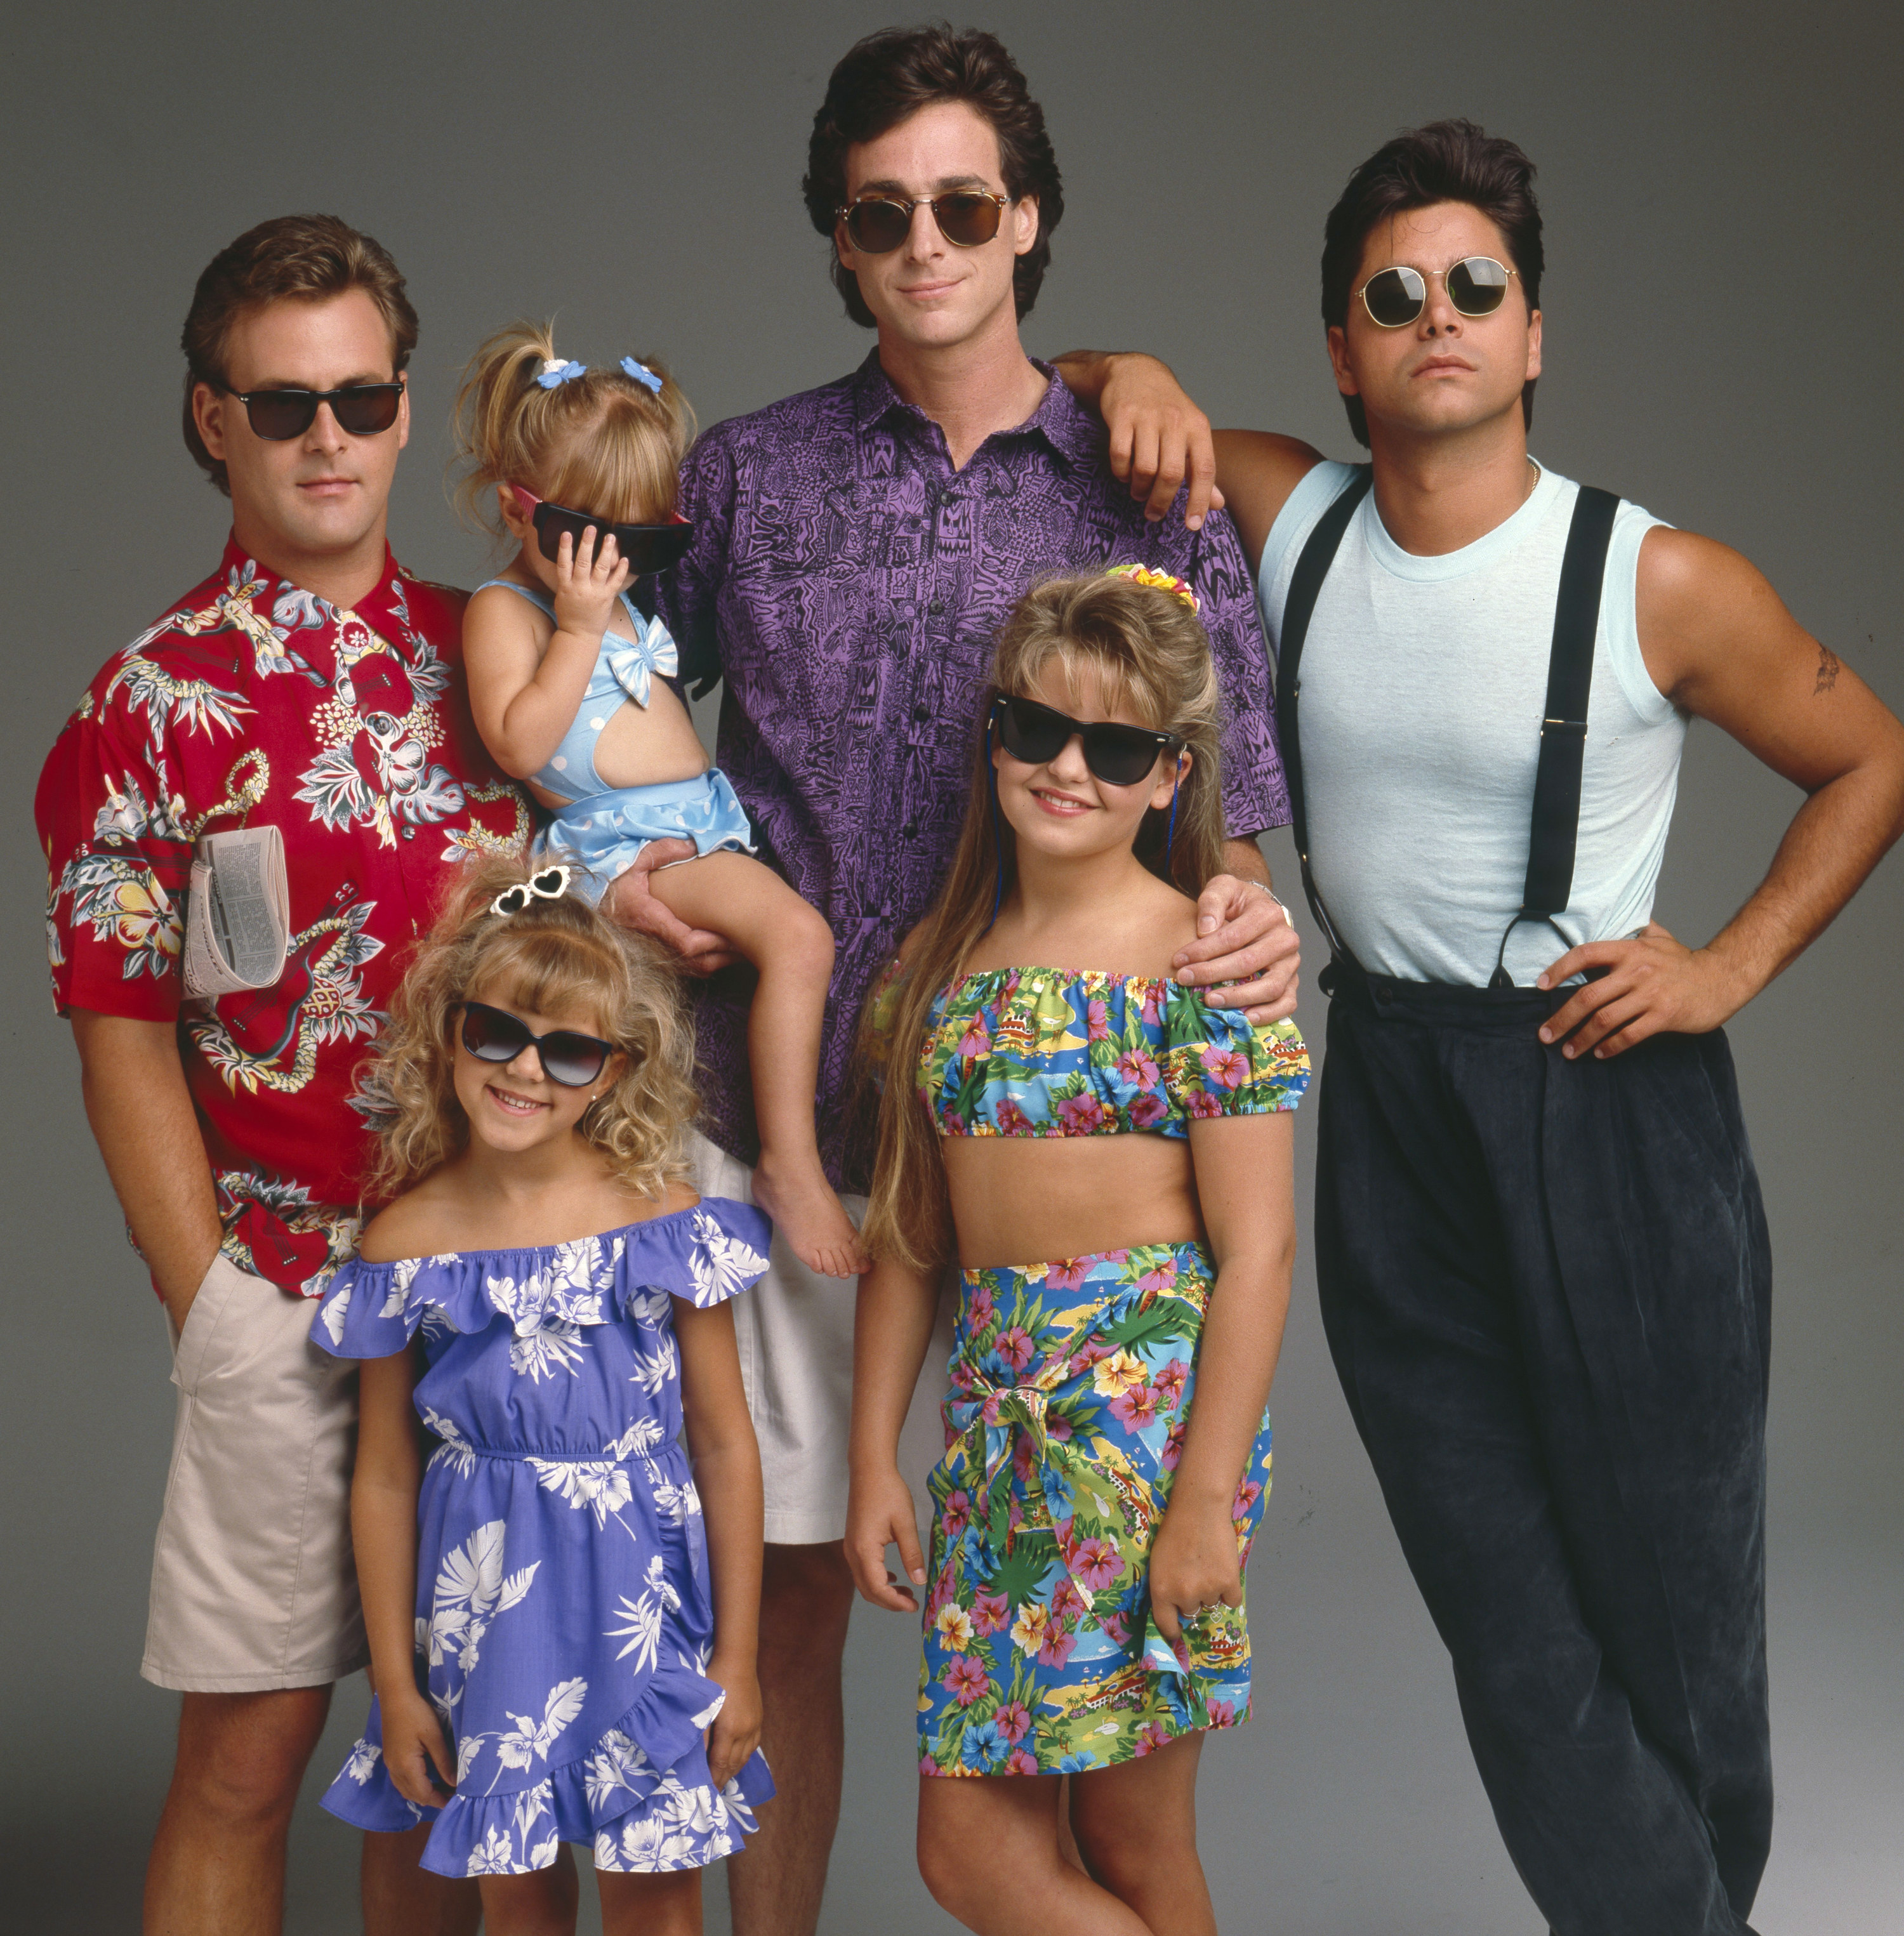 The cast of Full House, including a young Candace Cameron Bure